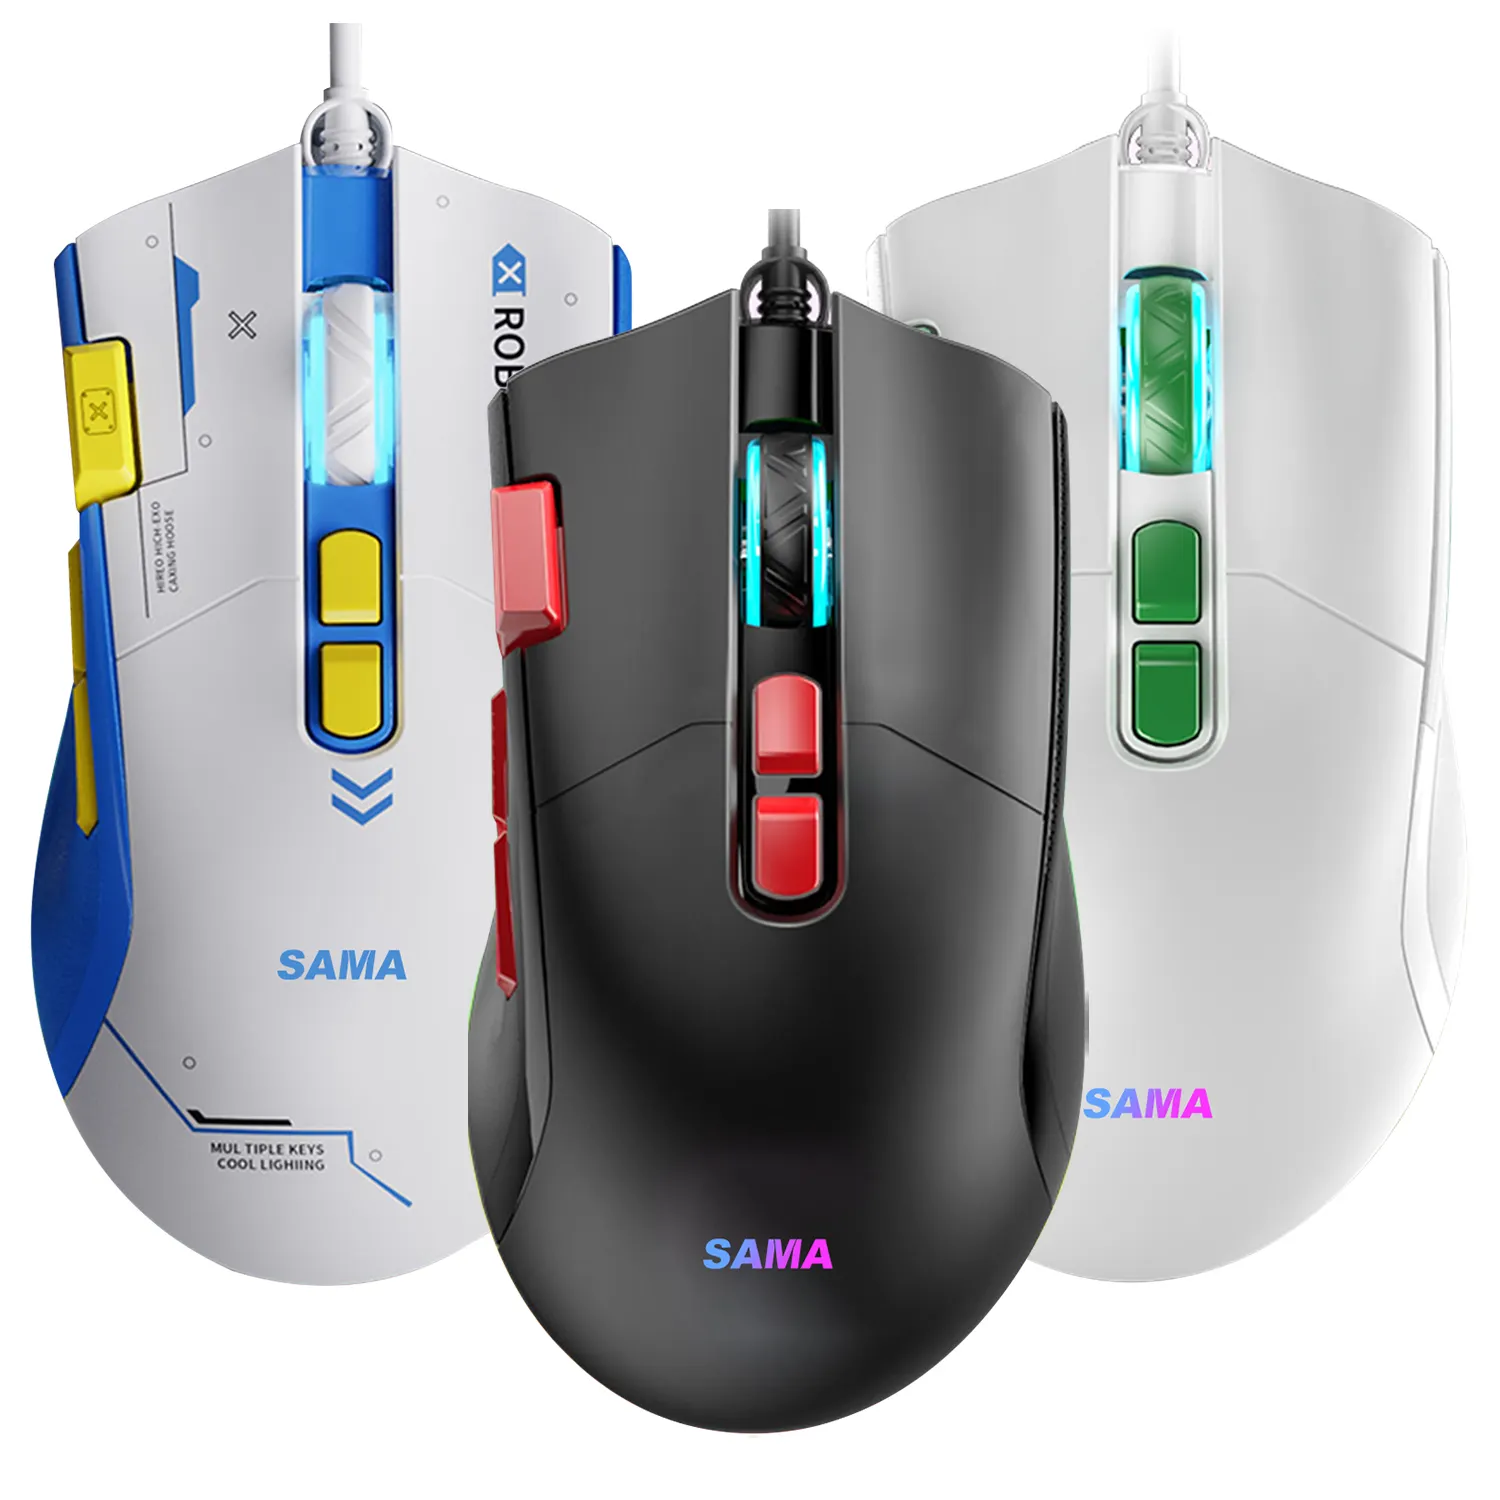 SAMA High-Performance Wired Gaming Mouse Ergonomic Adjustable DPI 8 Programmable Buttons PC Mac Black White RGB Mouse Mice